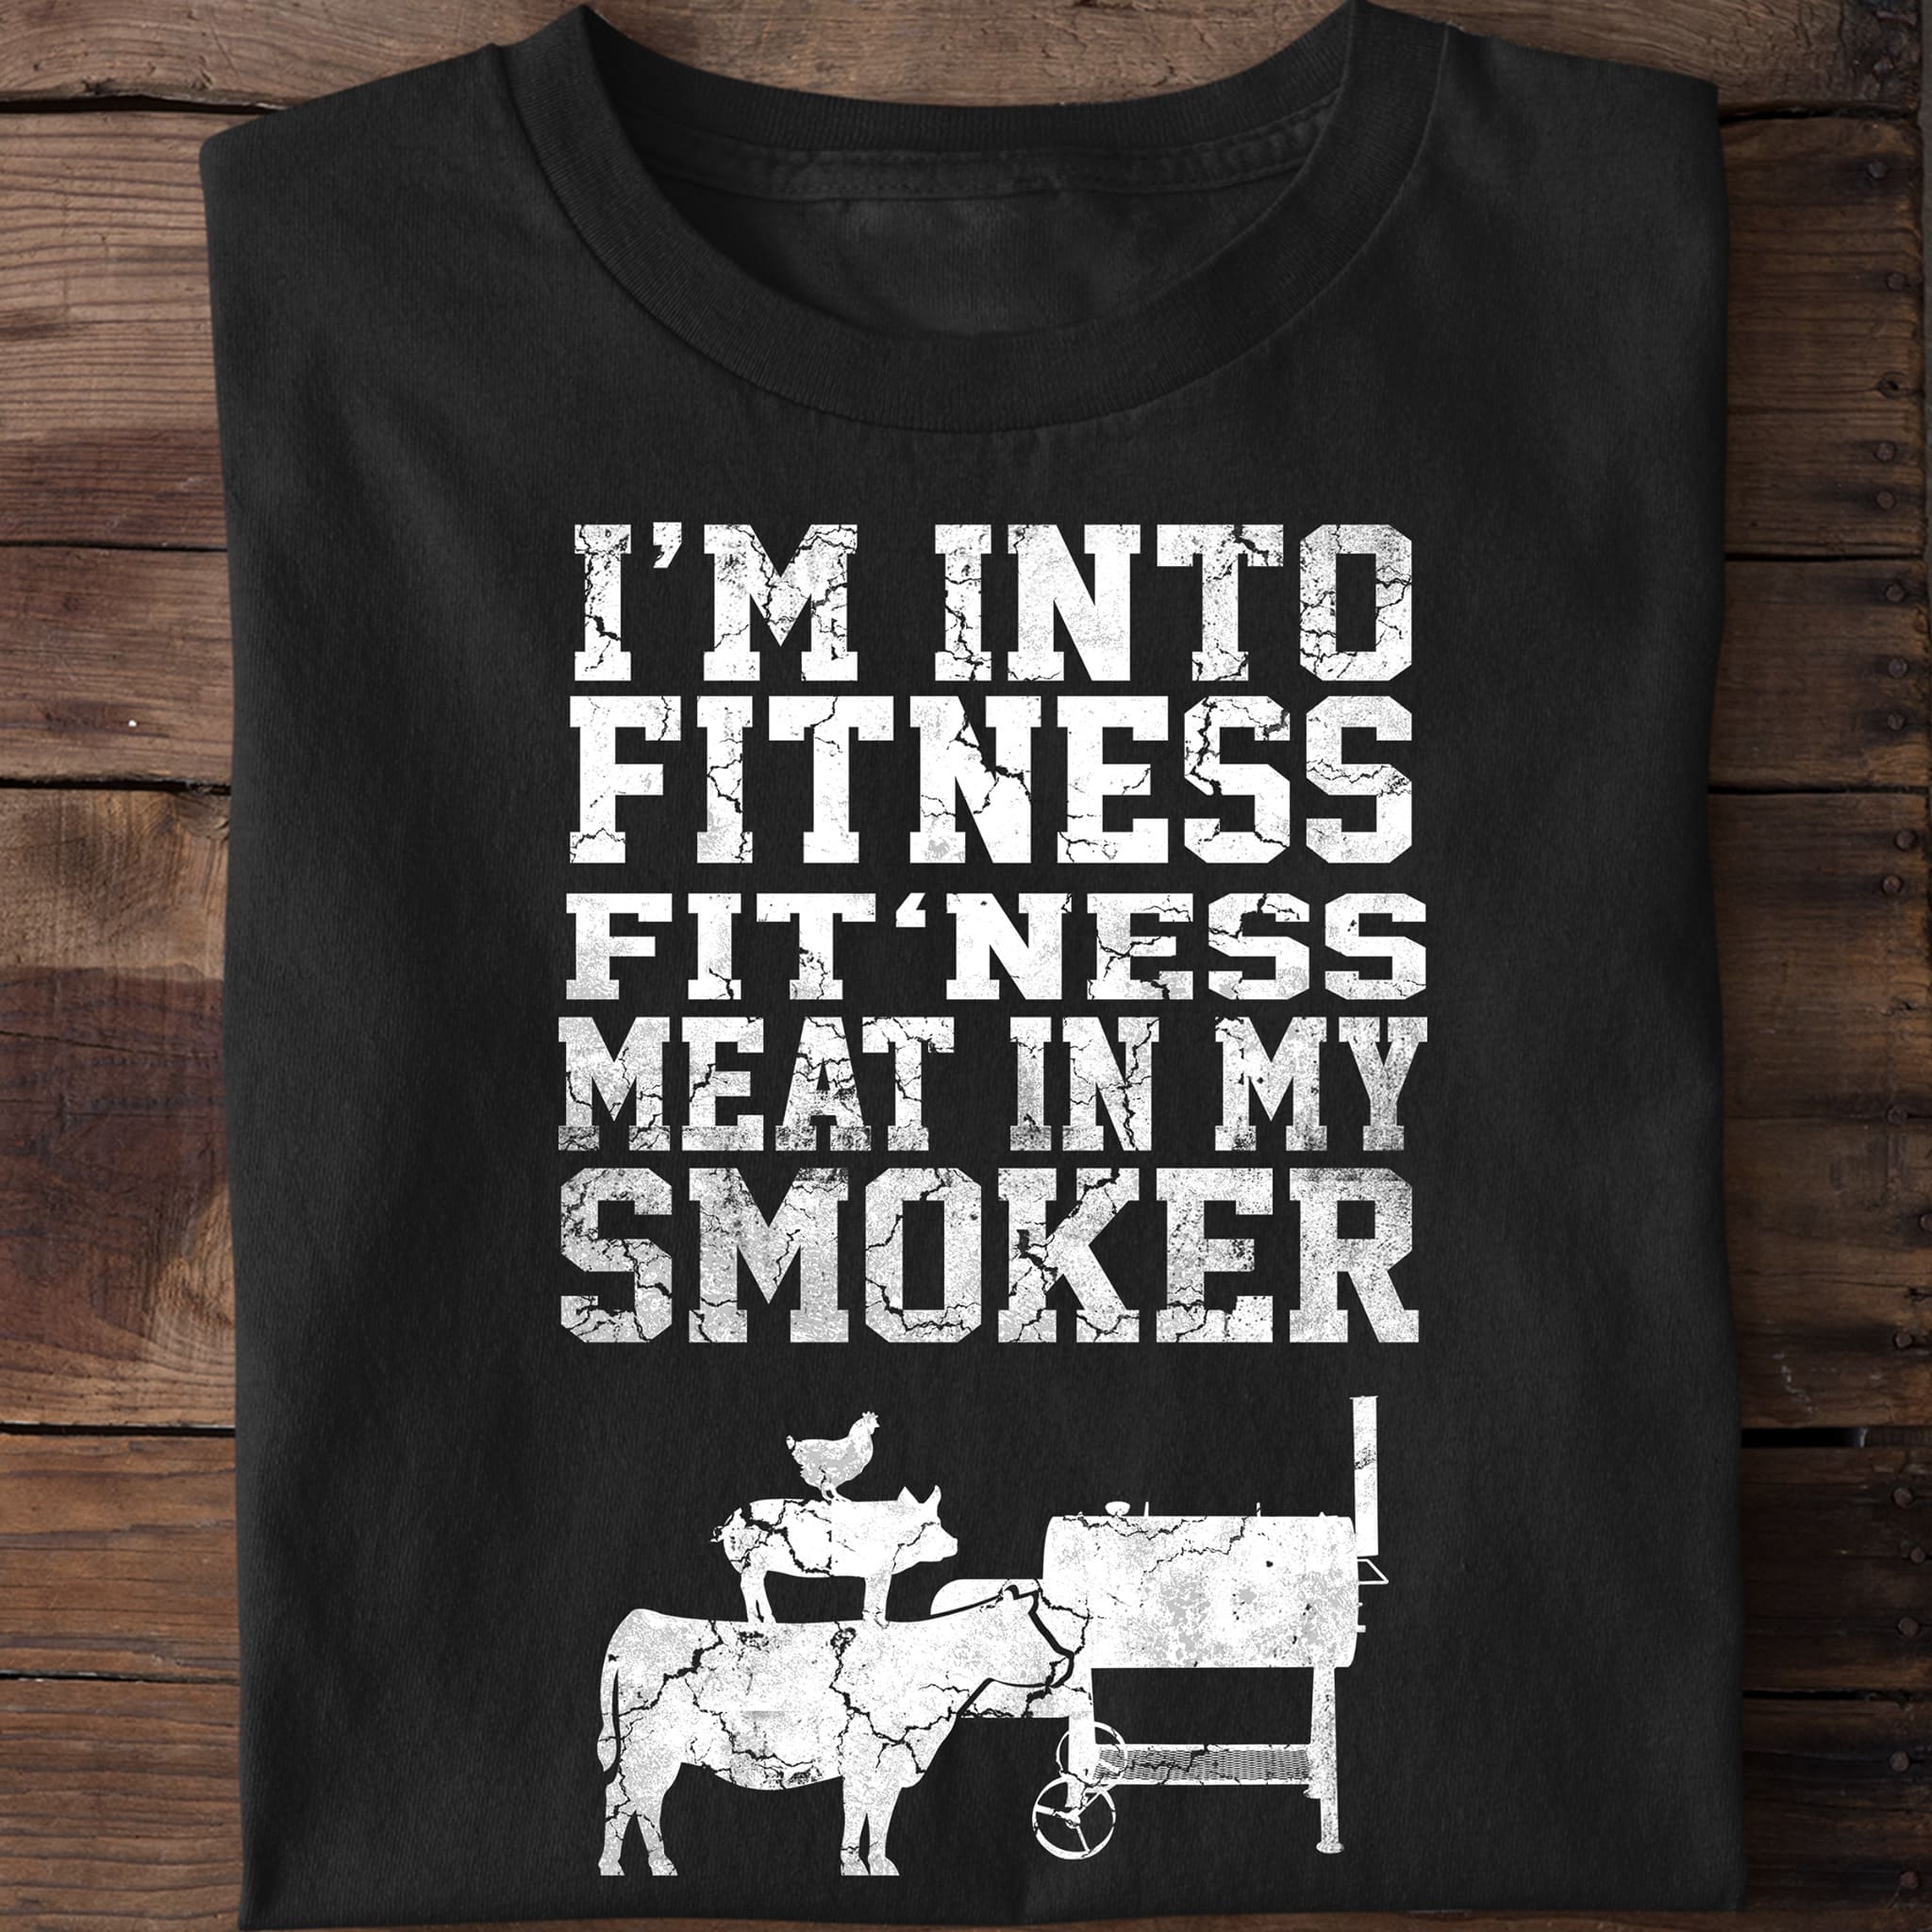 I'm into fitness, fitness meat in smoker - Grilled meat T-shirt